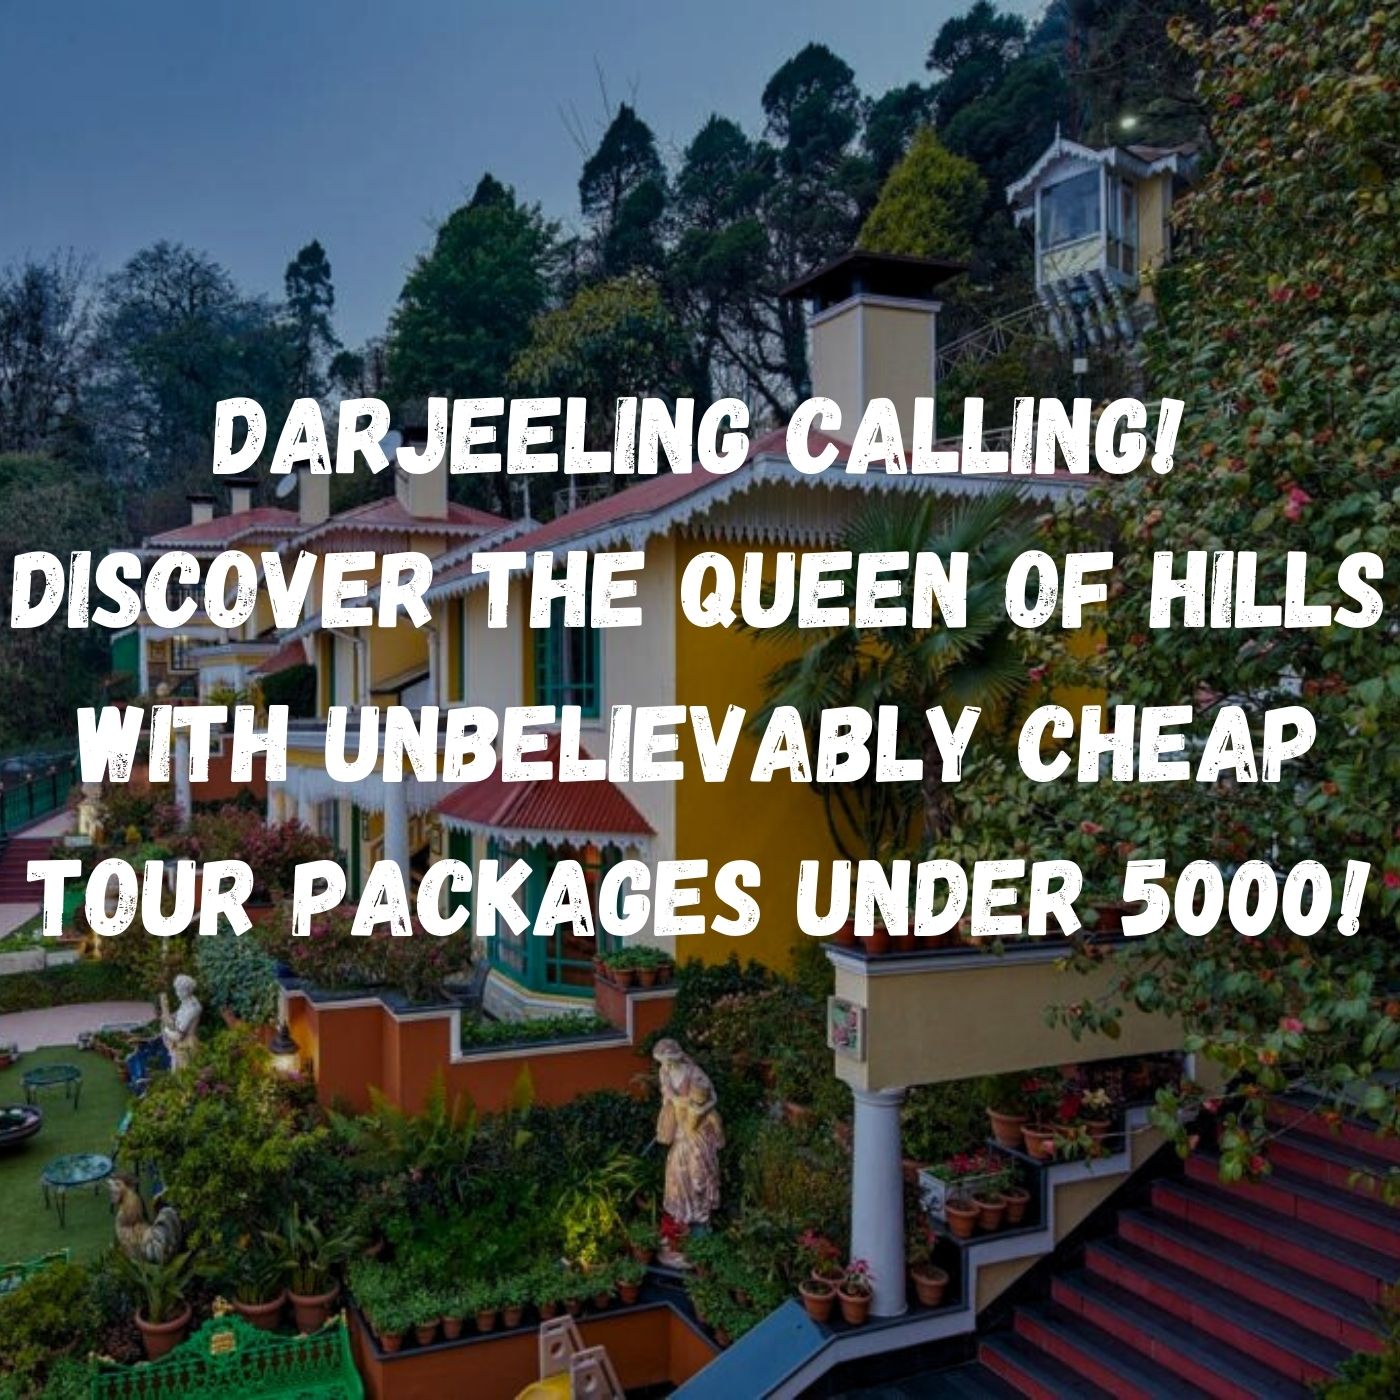 Darjeeling Calling! Discover the Queen of Hills with Unbelievably Cheap Tour Packages Under 5000!